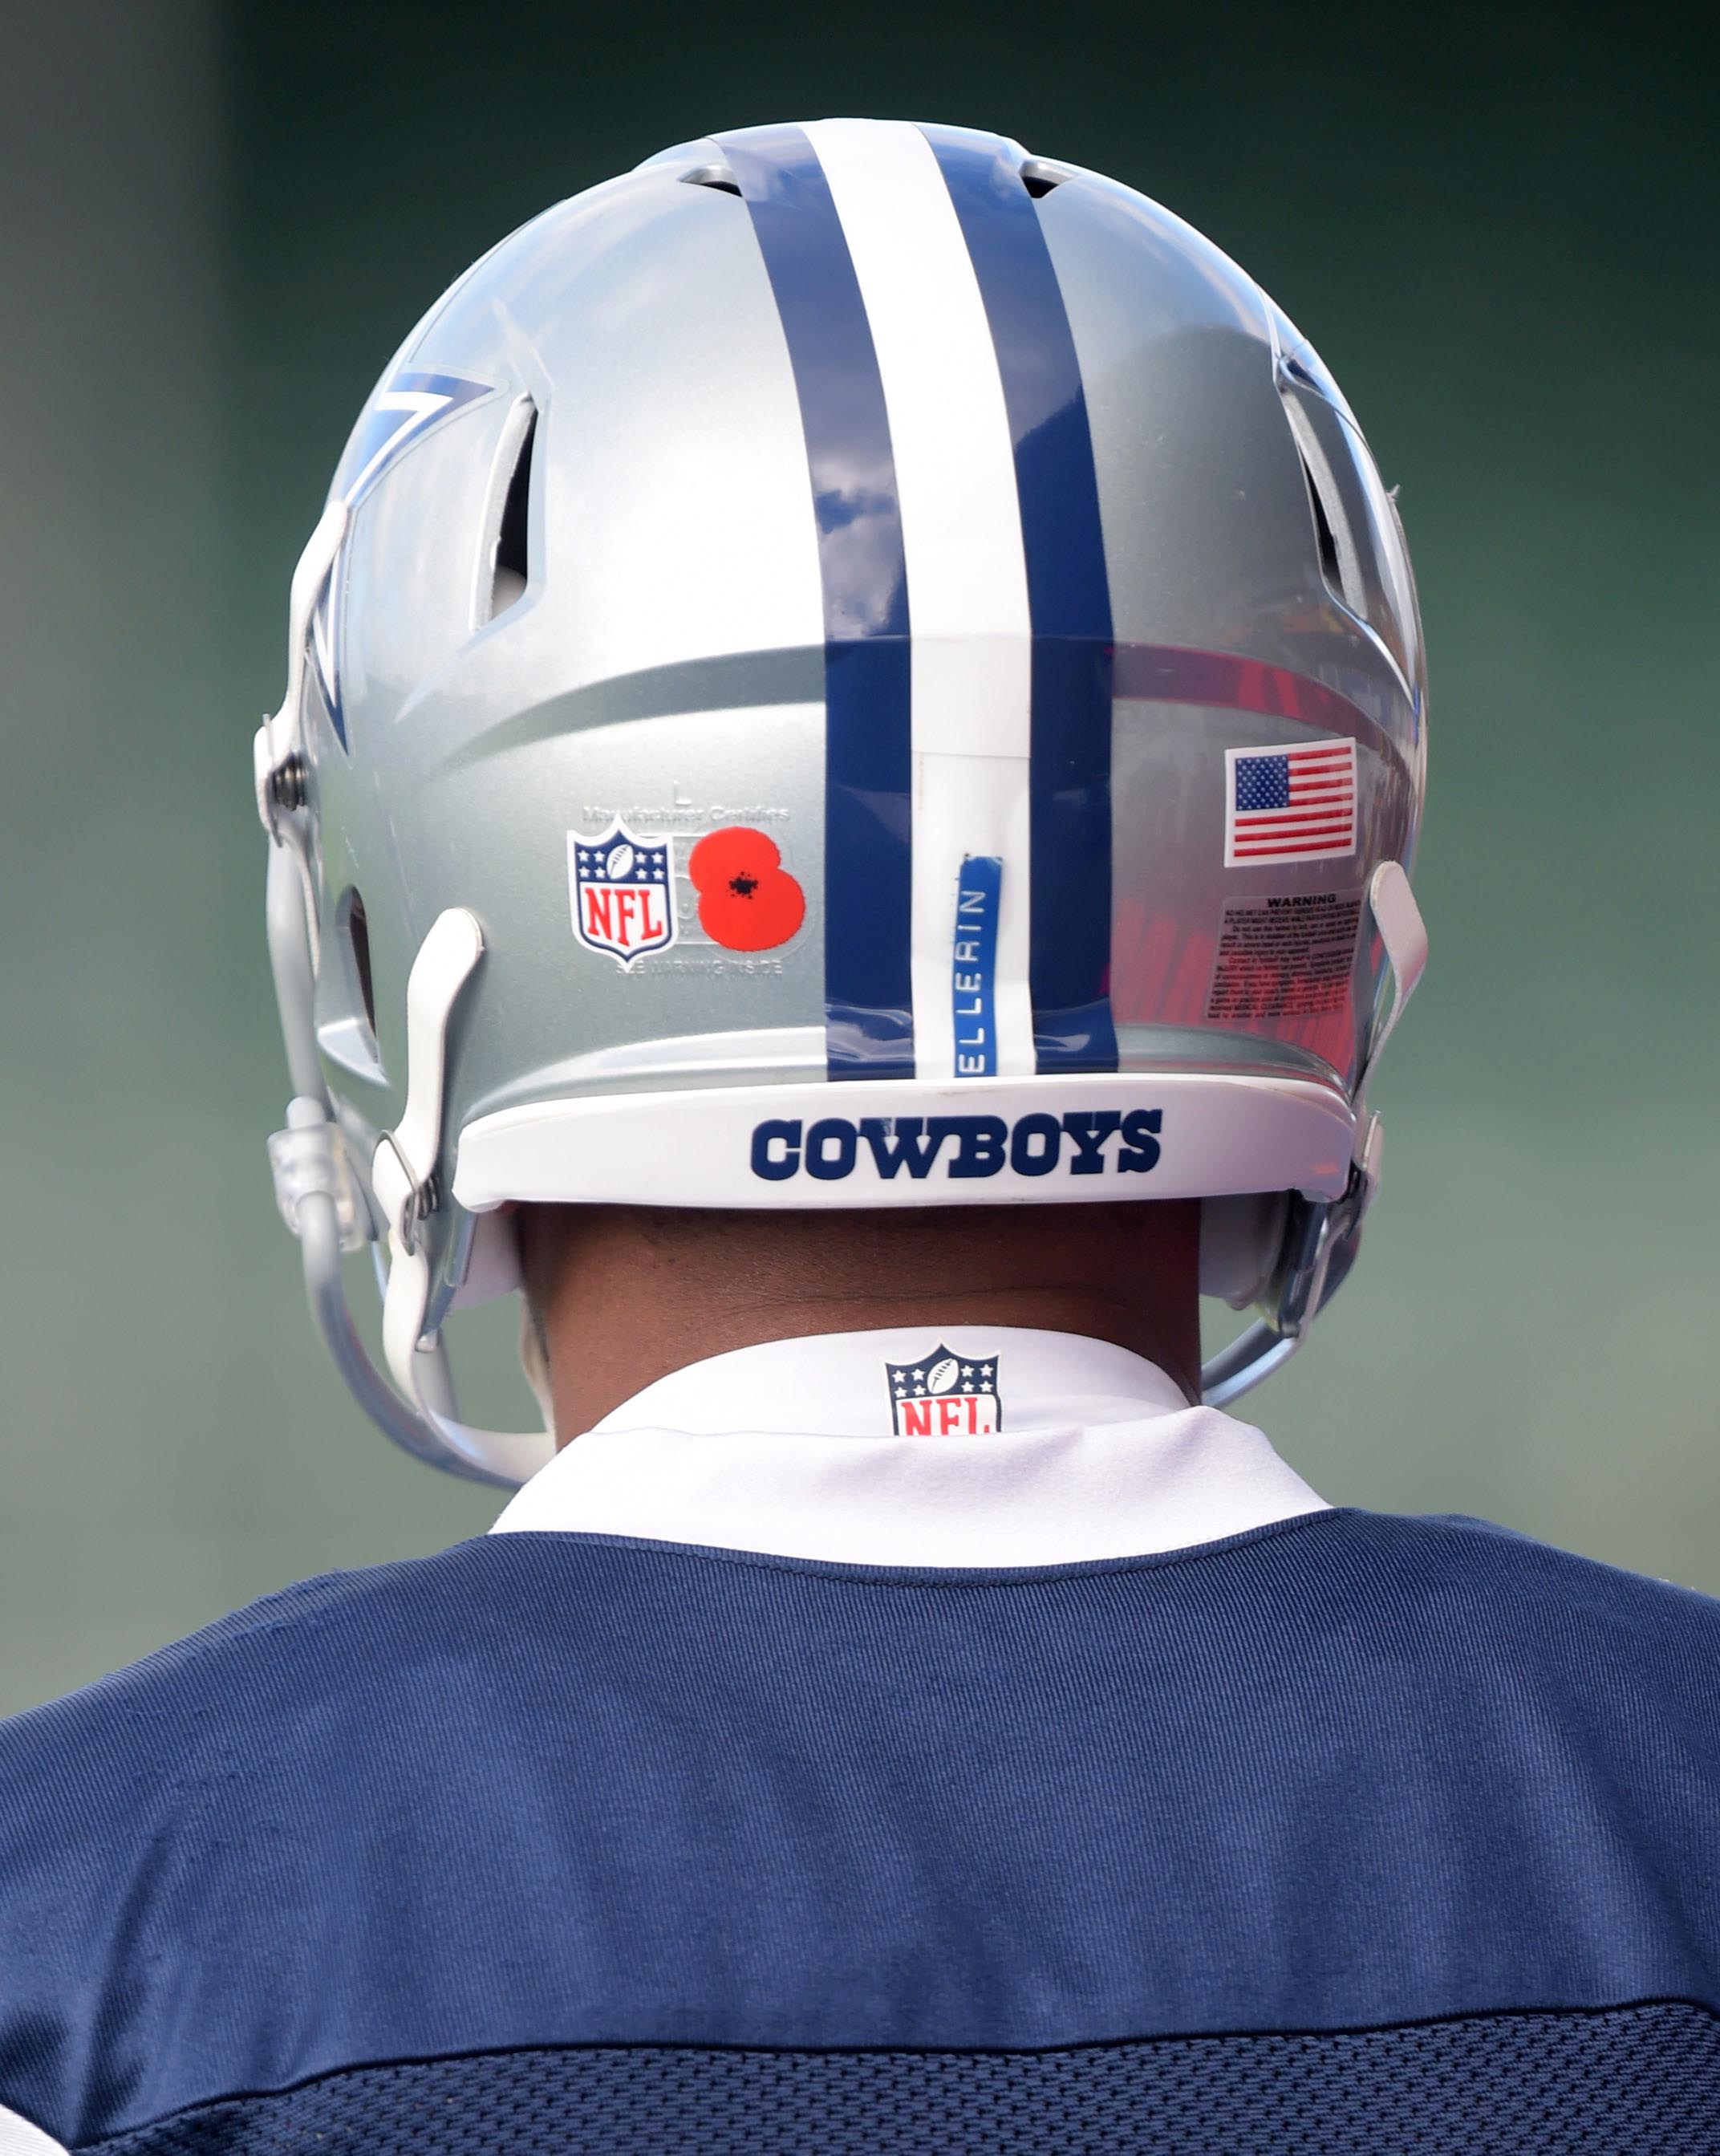 Why are the Dallas Cowboys wearing red flowers on their London jerseys?